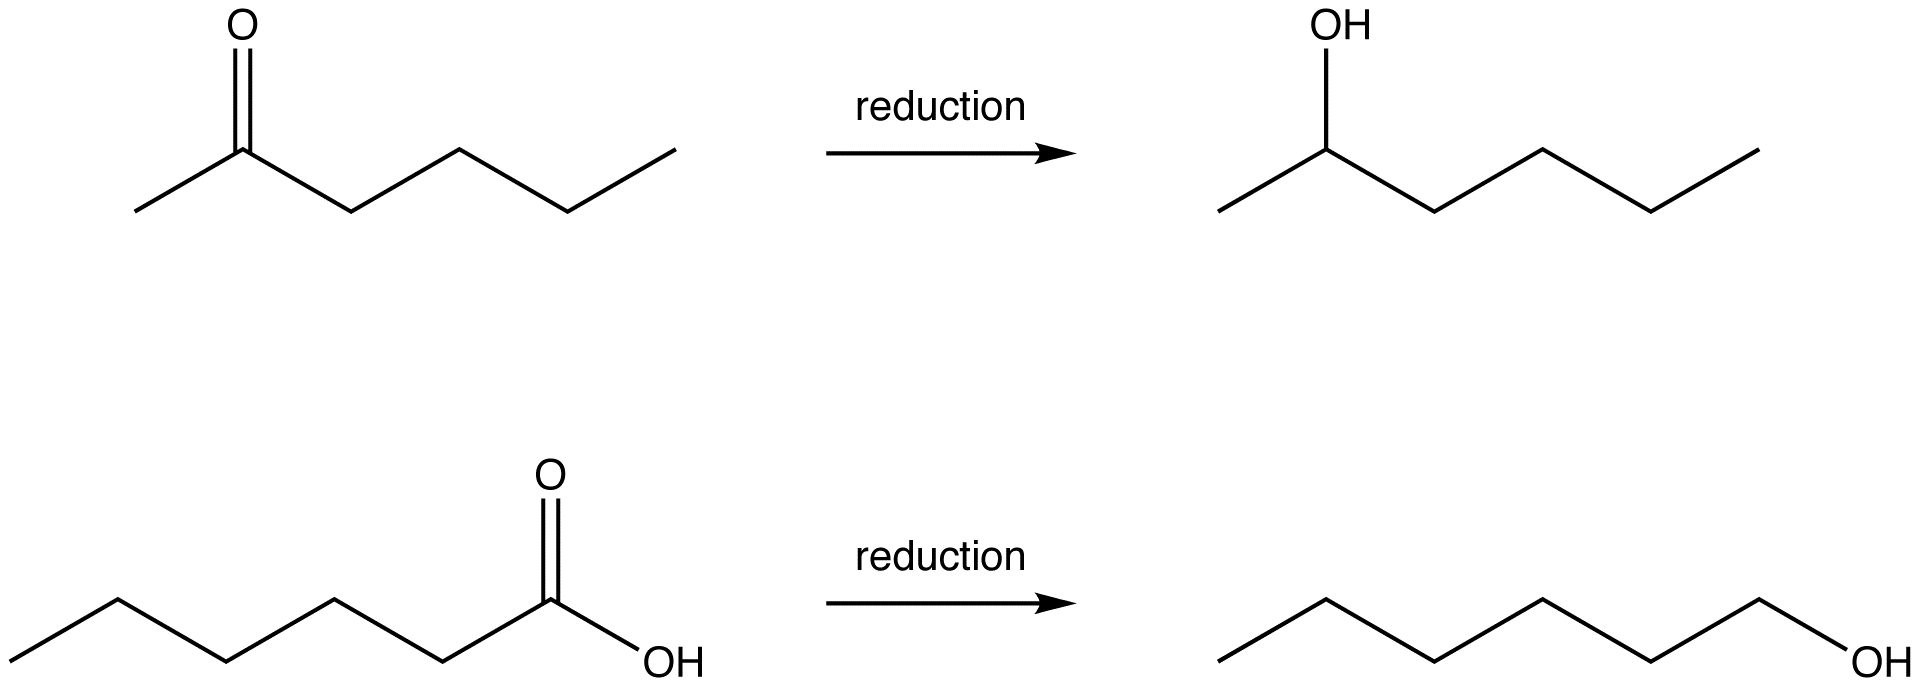 chemoselective1.png